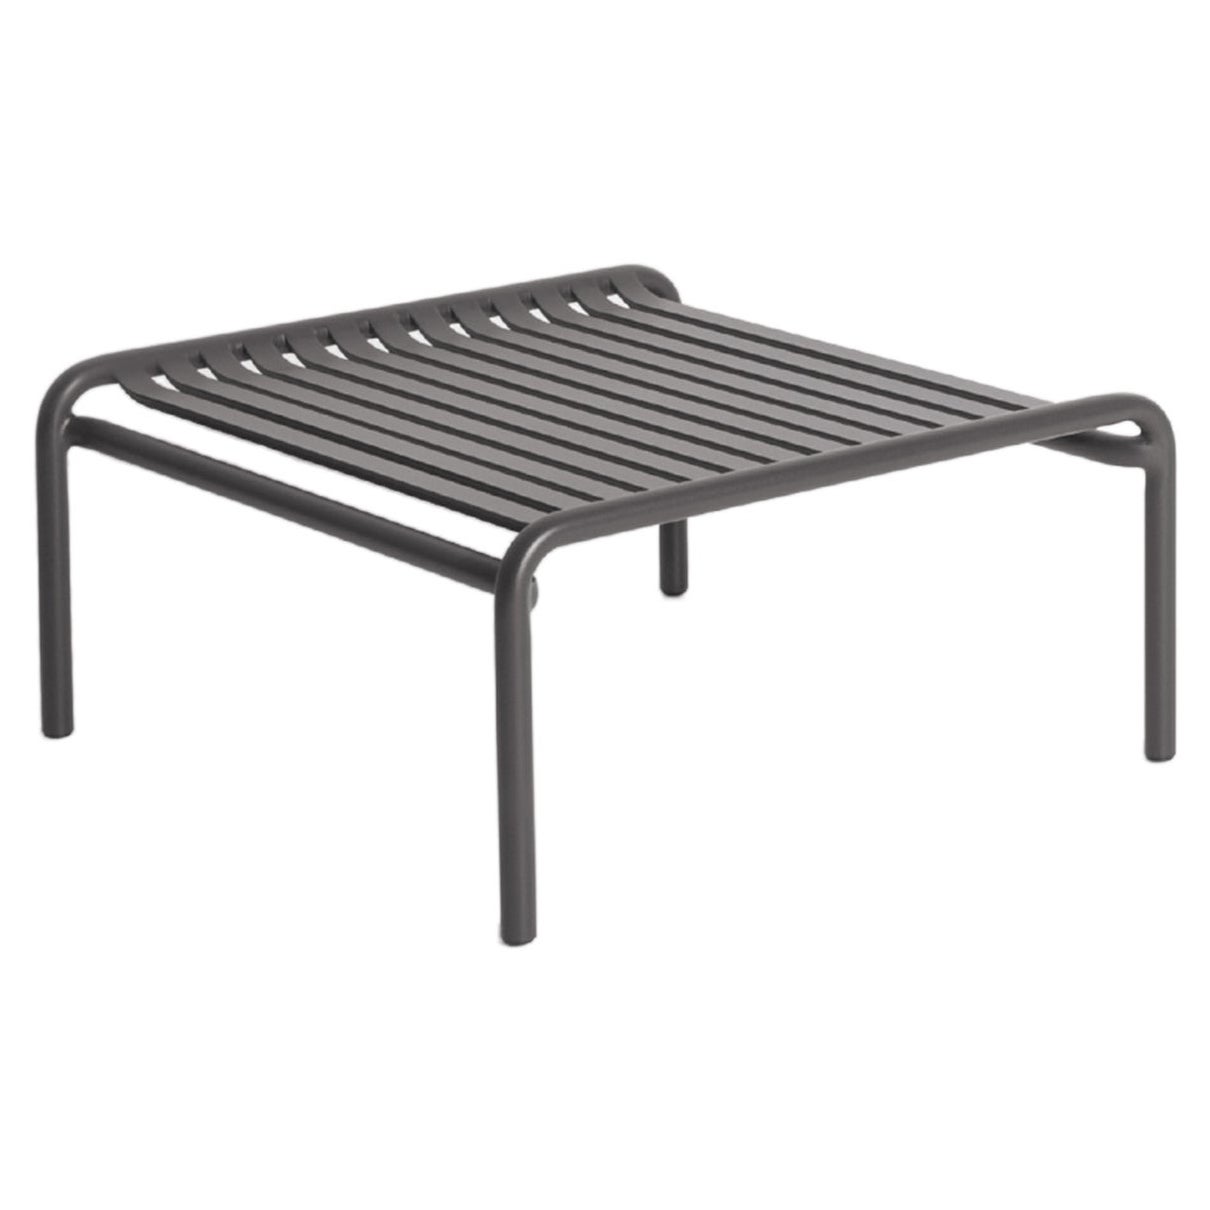 Petite Friture Week-End Coffee Table in Anthracite Aluminium, 2017 For Sale